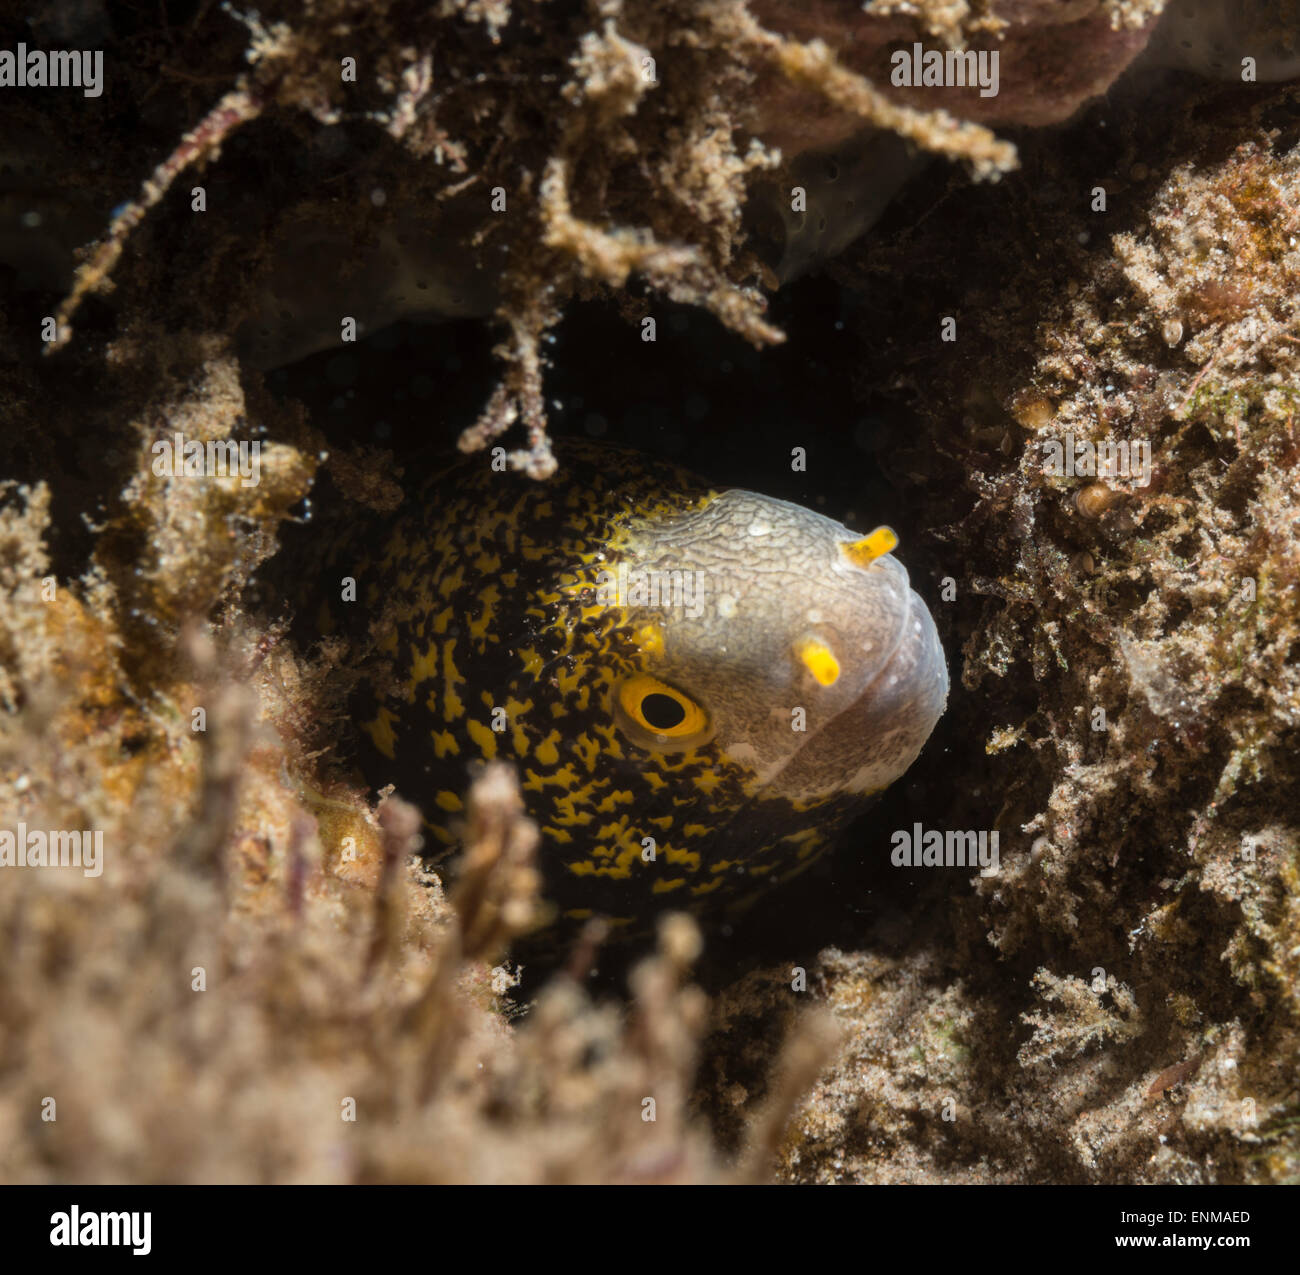 Snowflake moray eel peeking out from a hole in the corals Stock Photo